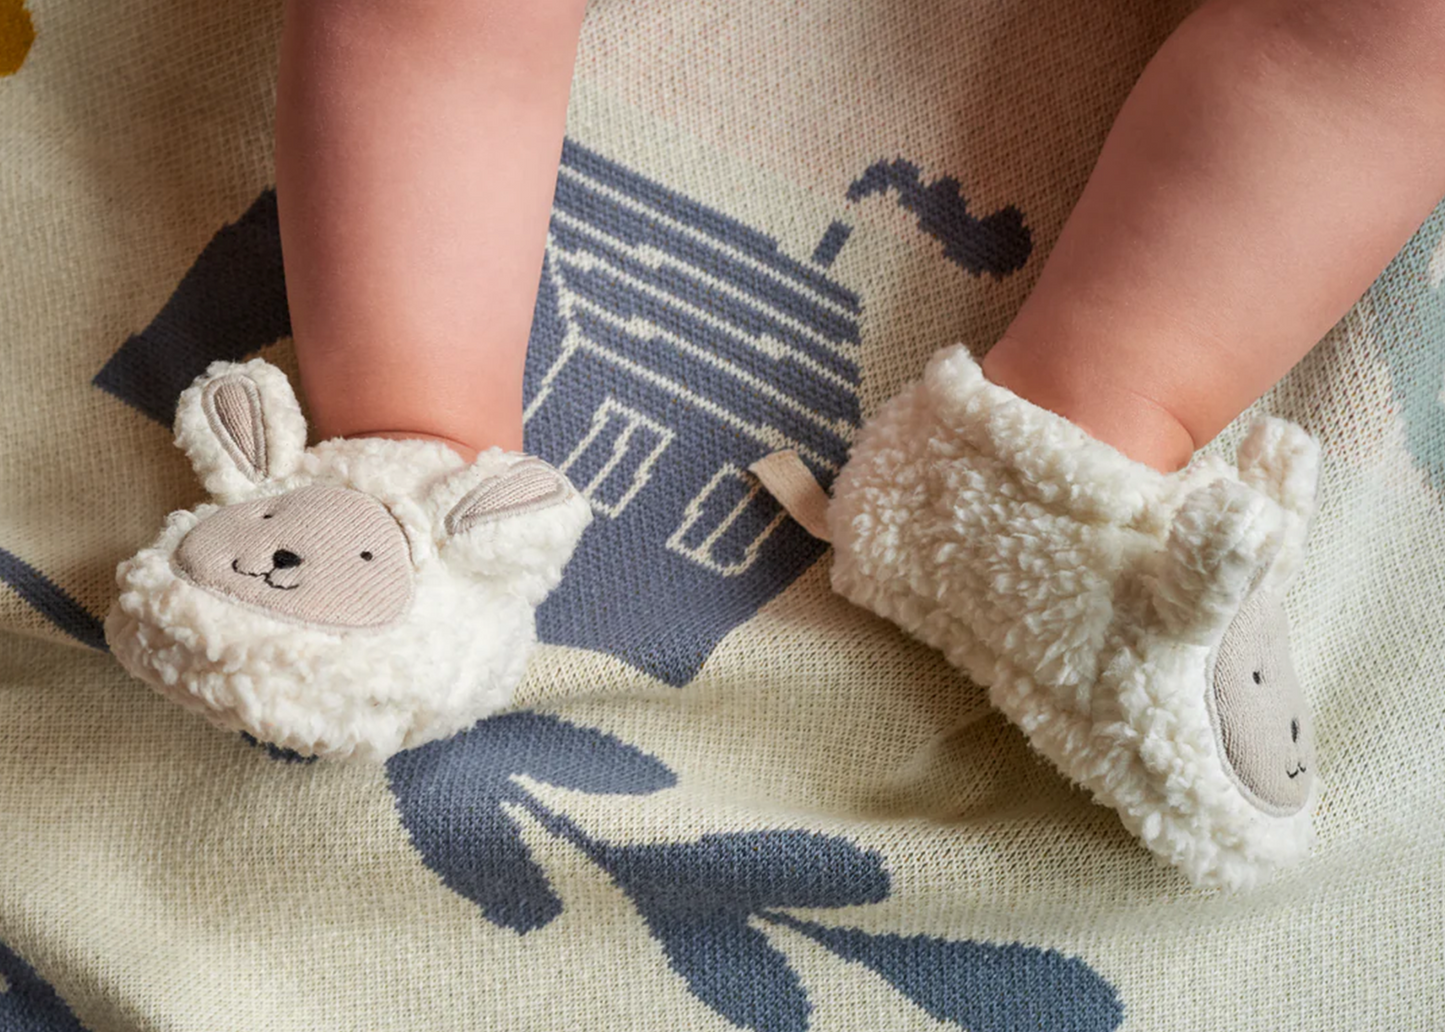 Sheep shaped baby booties on the feet of an infant